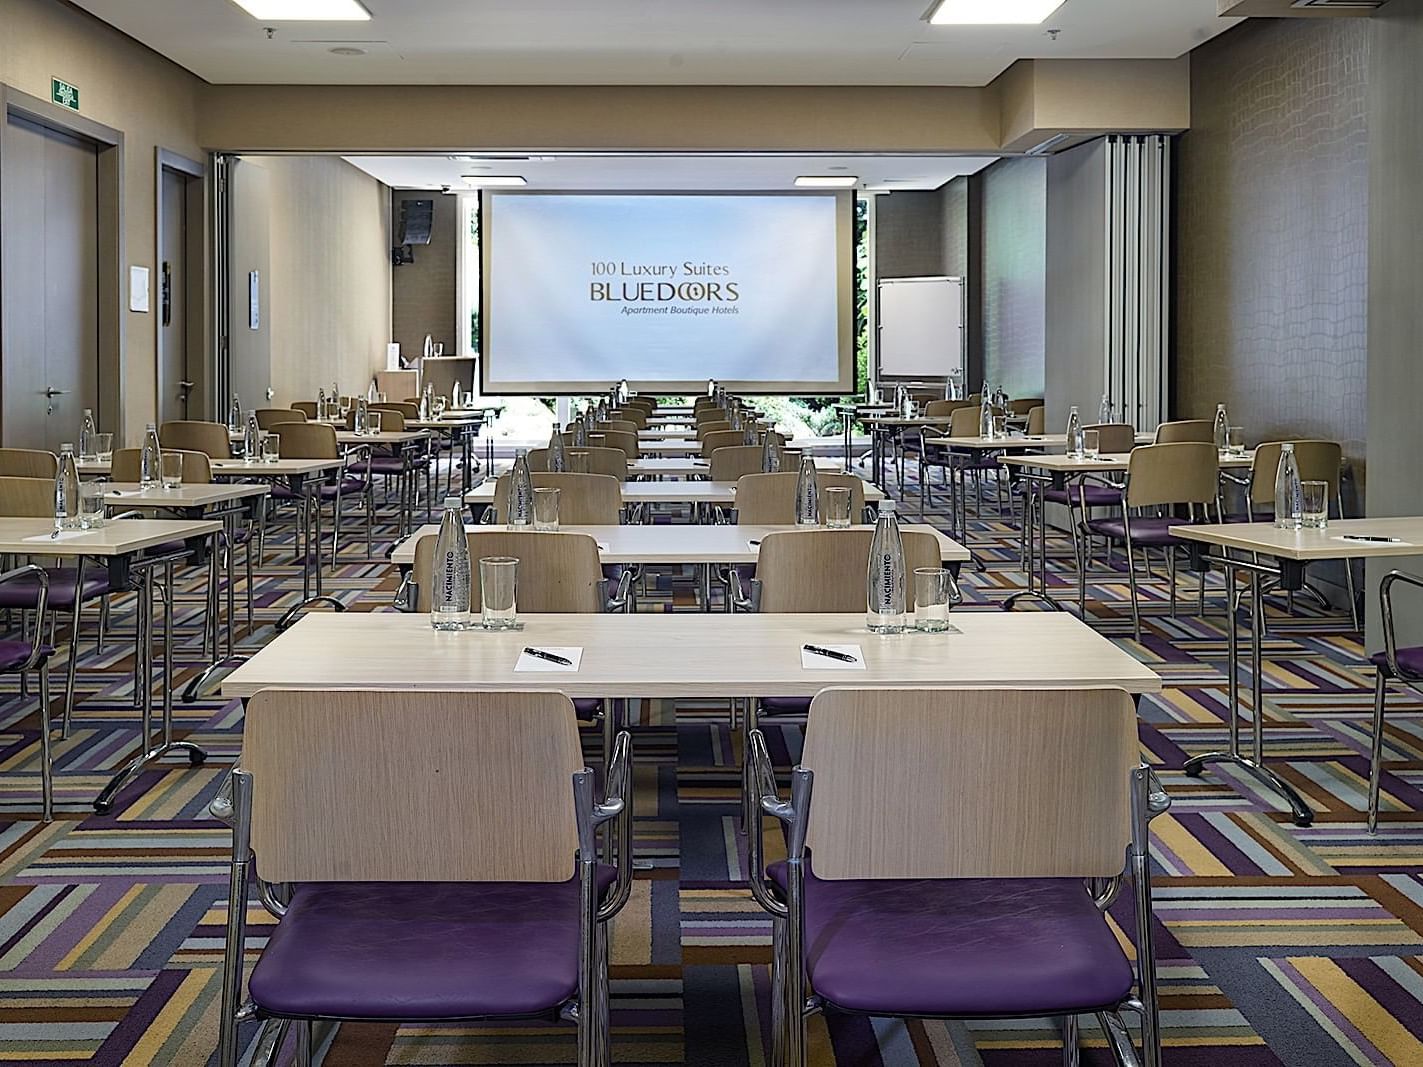 Classroom type setup in a meeting room at Blue Doors Hotels